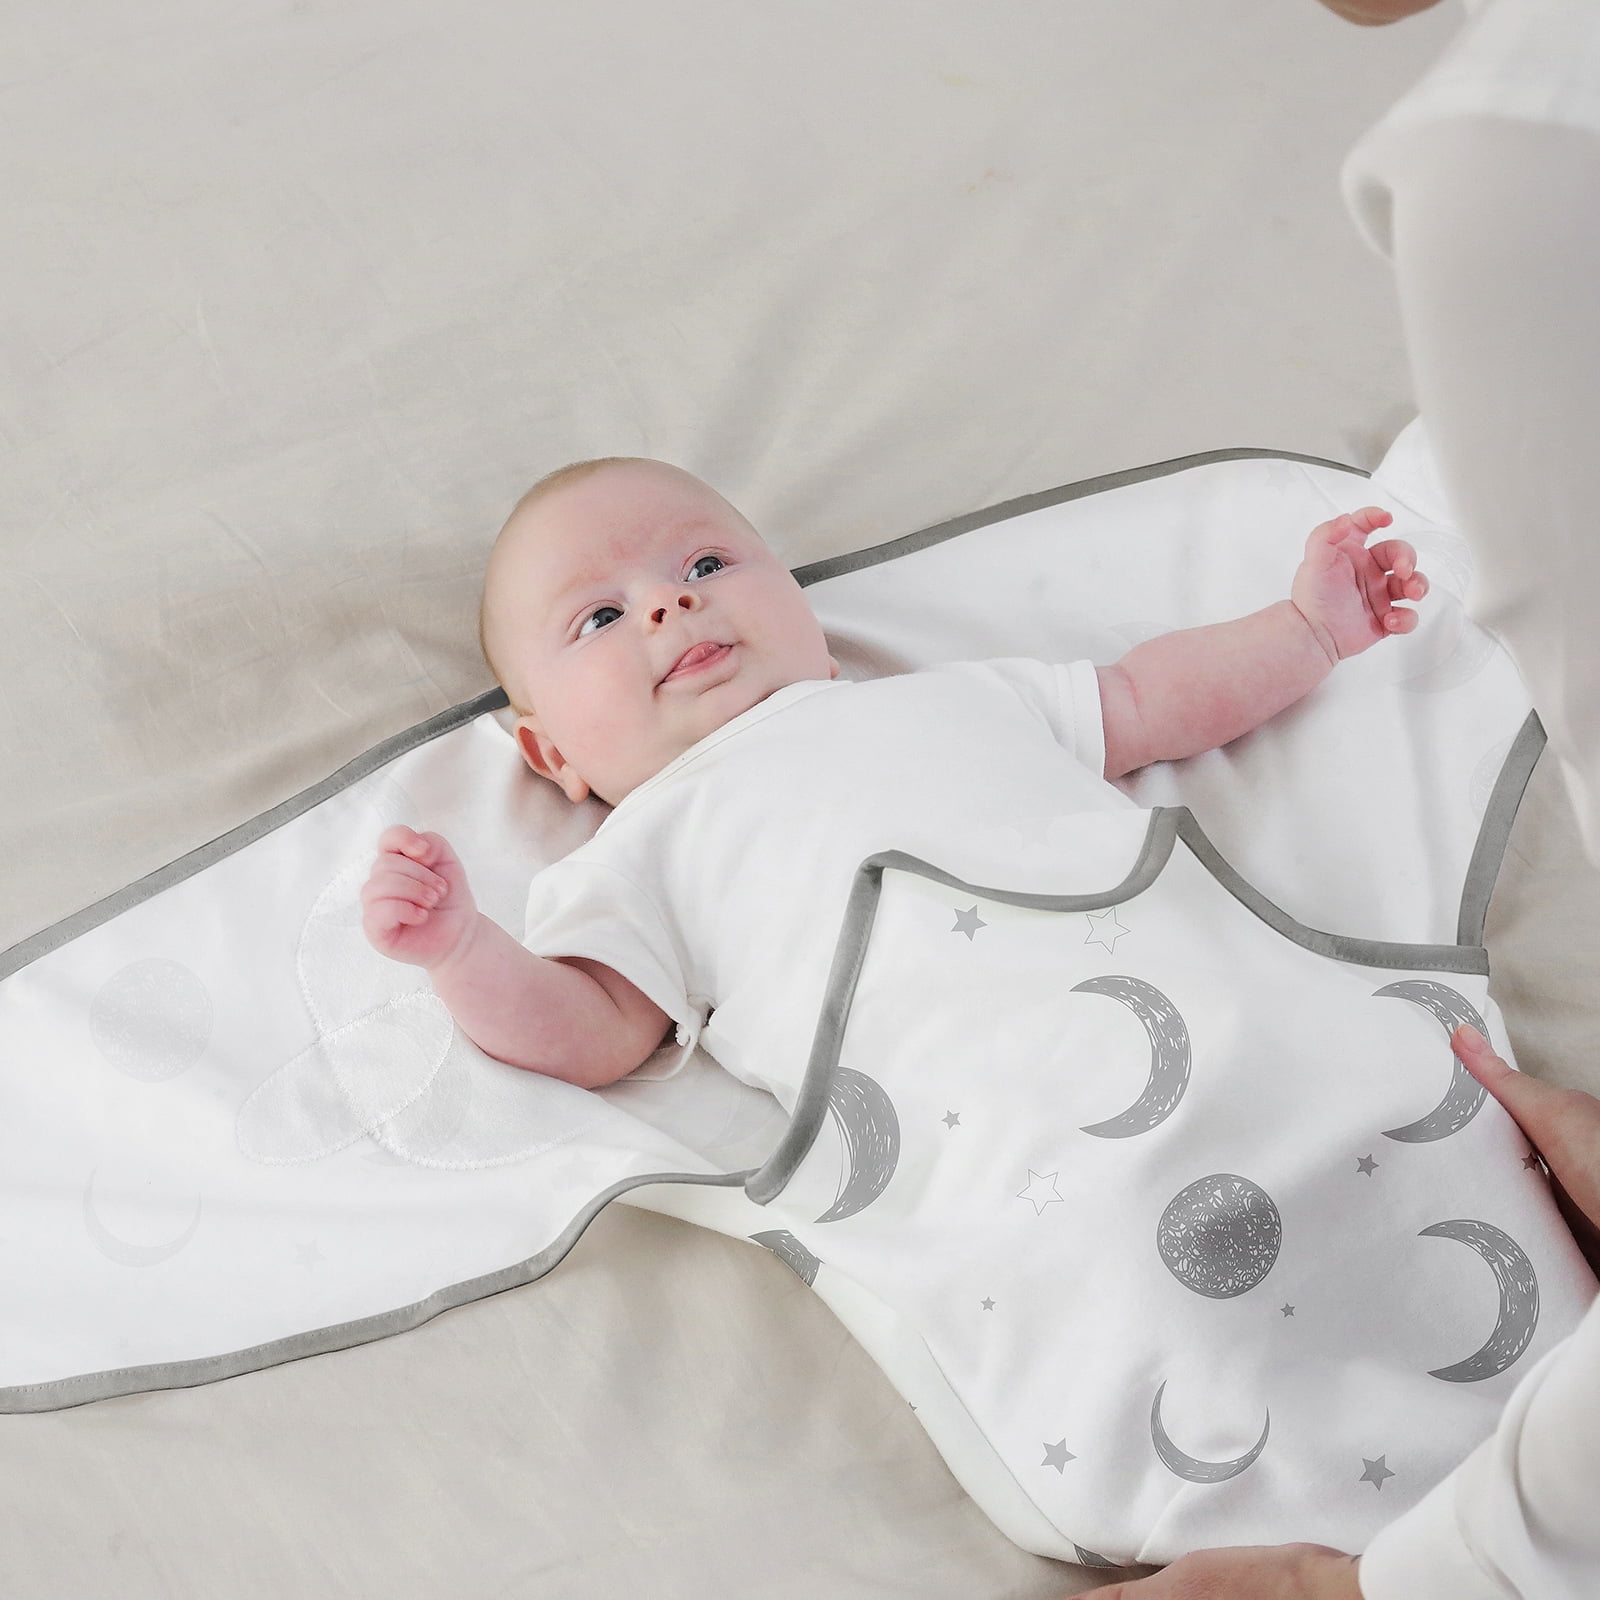 Little Seeds Baby Swaddle Blanket 0-3 Months 100% Organic Cotton